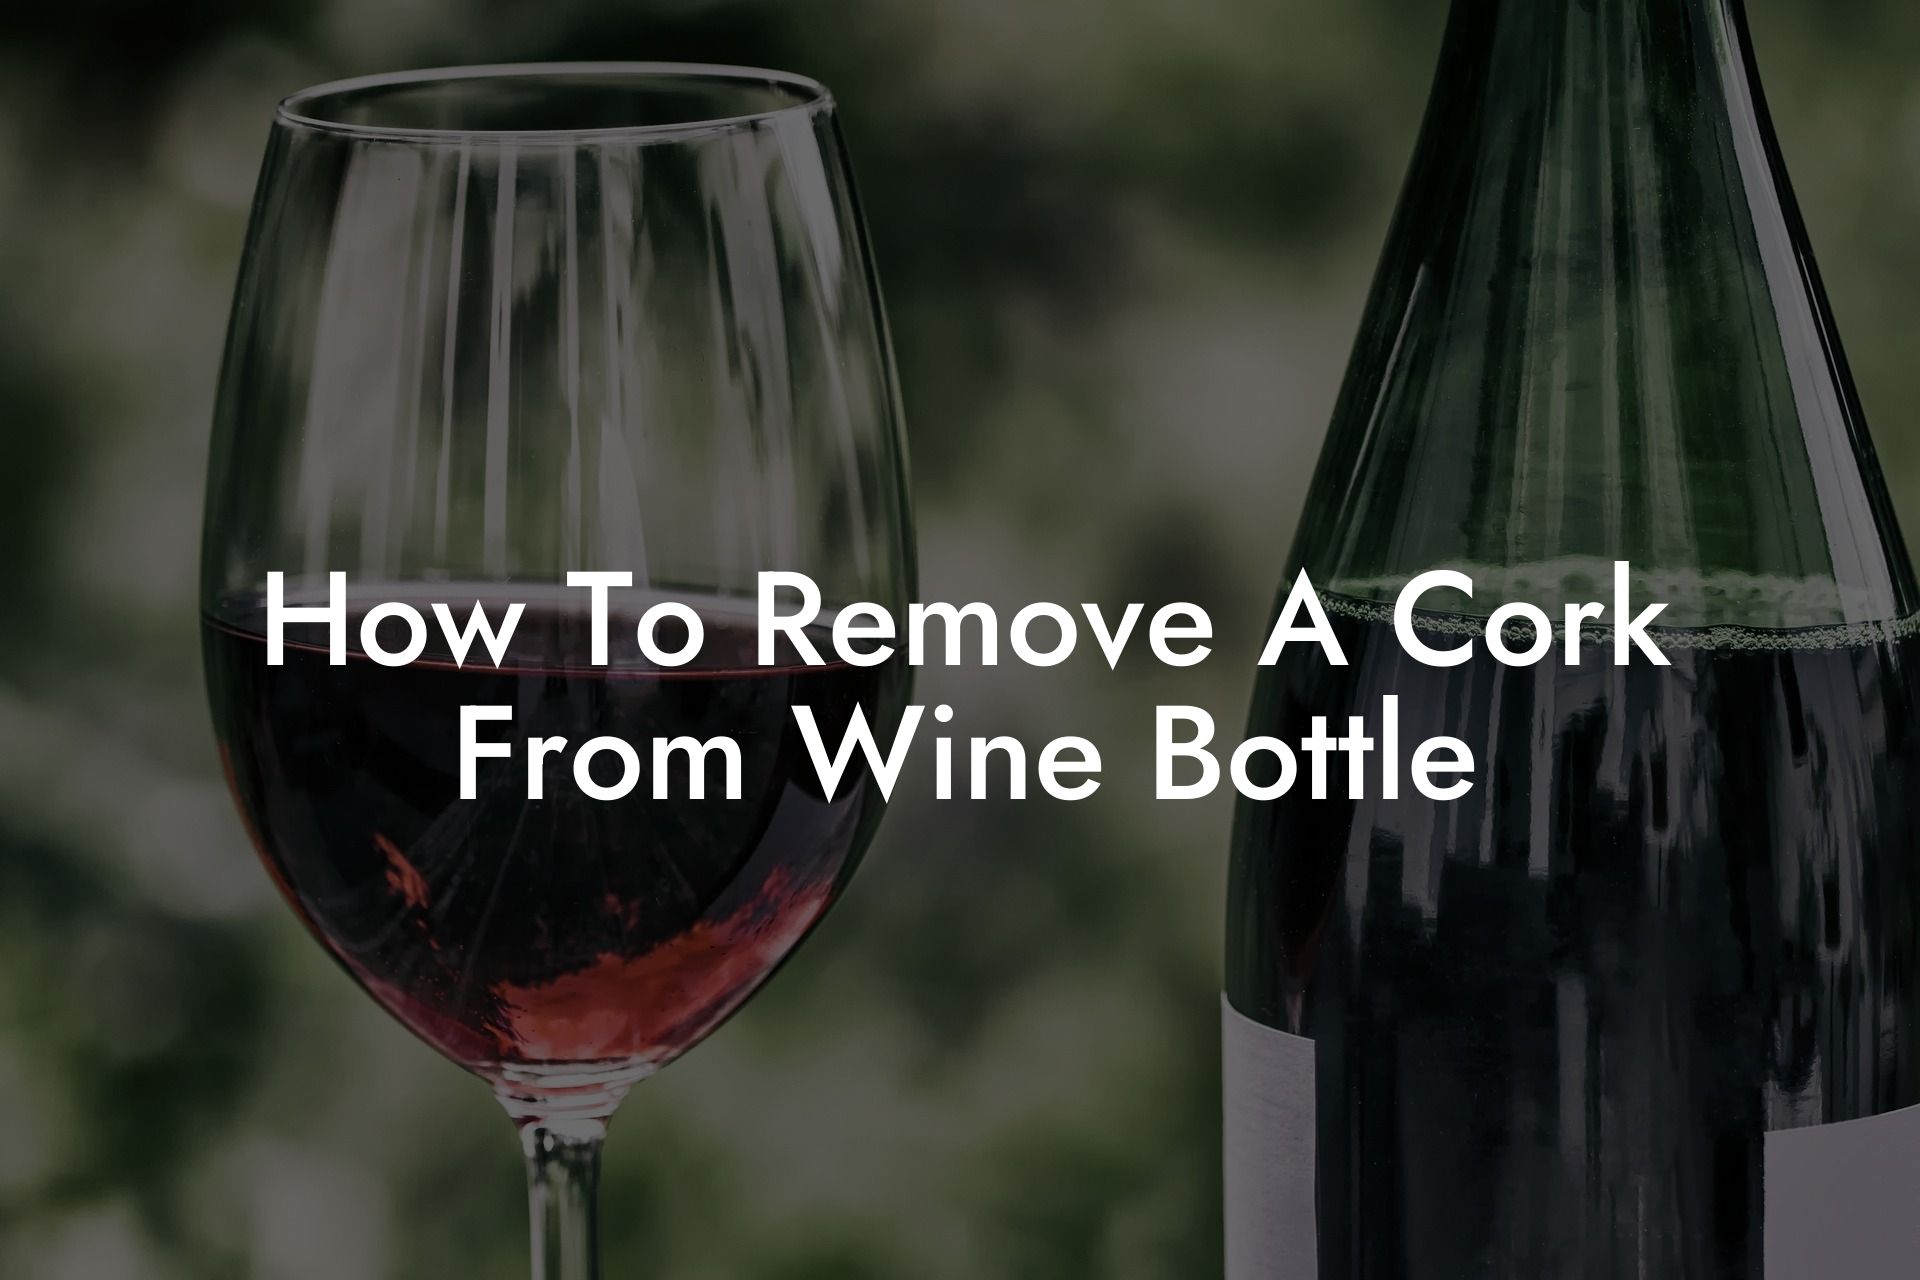 How To Remove A Cork From Wine Bottle